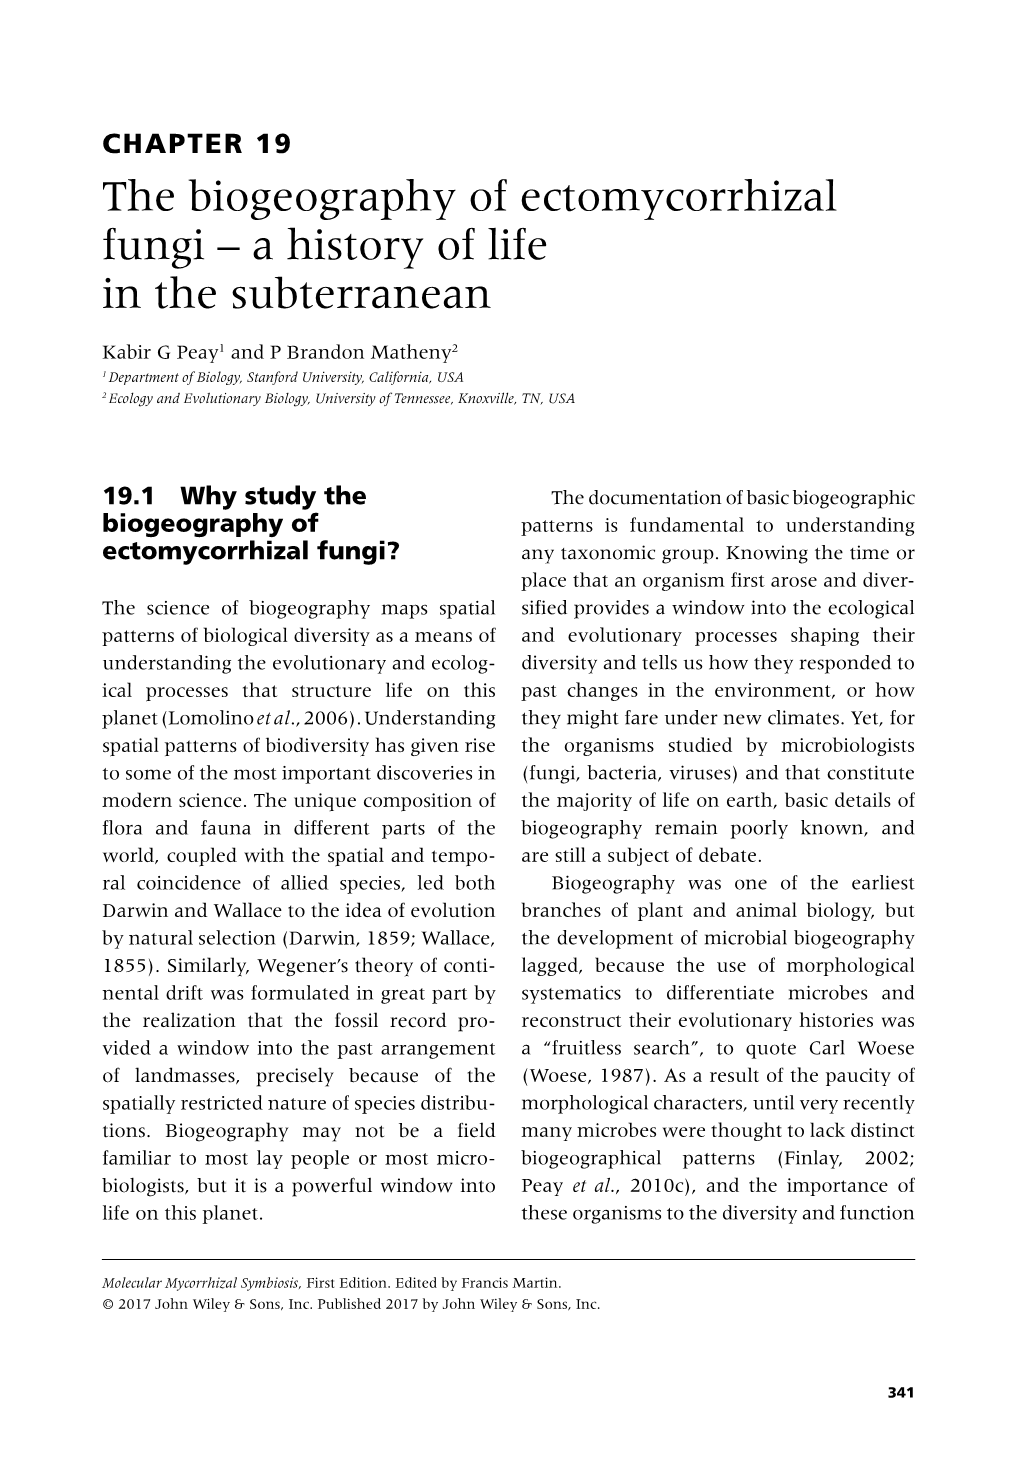 The Biogeography of Ectomycorrhizal Fungi a History of Life in The